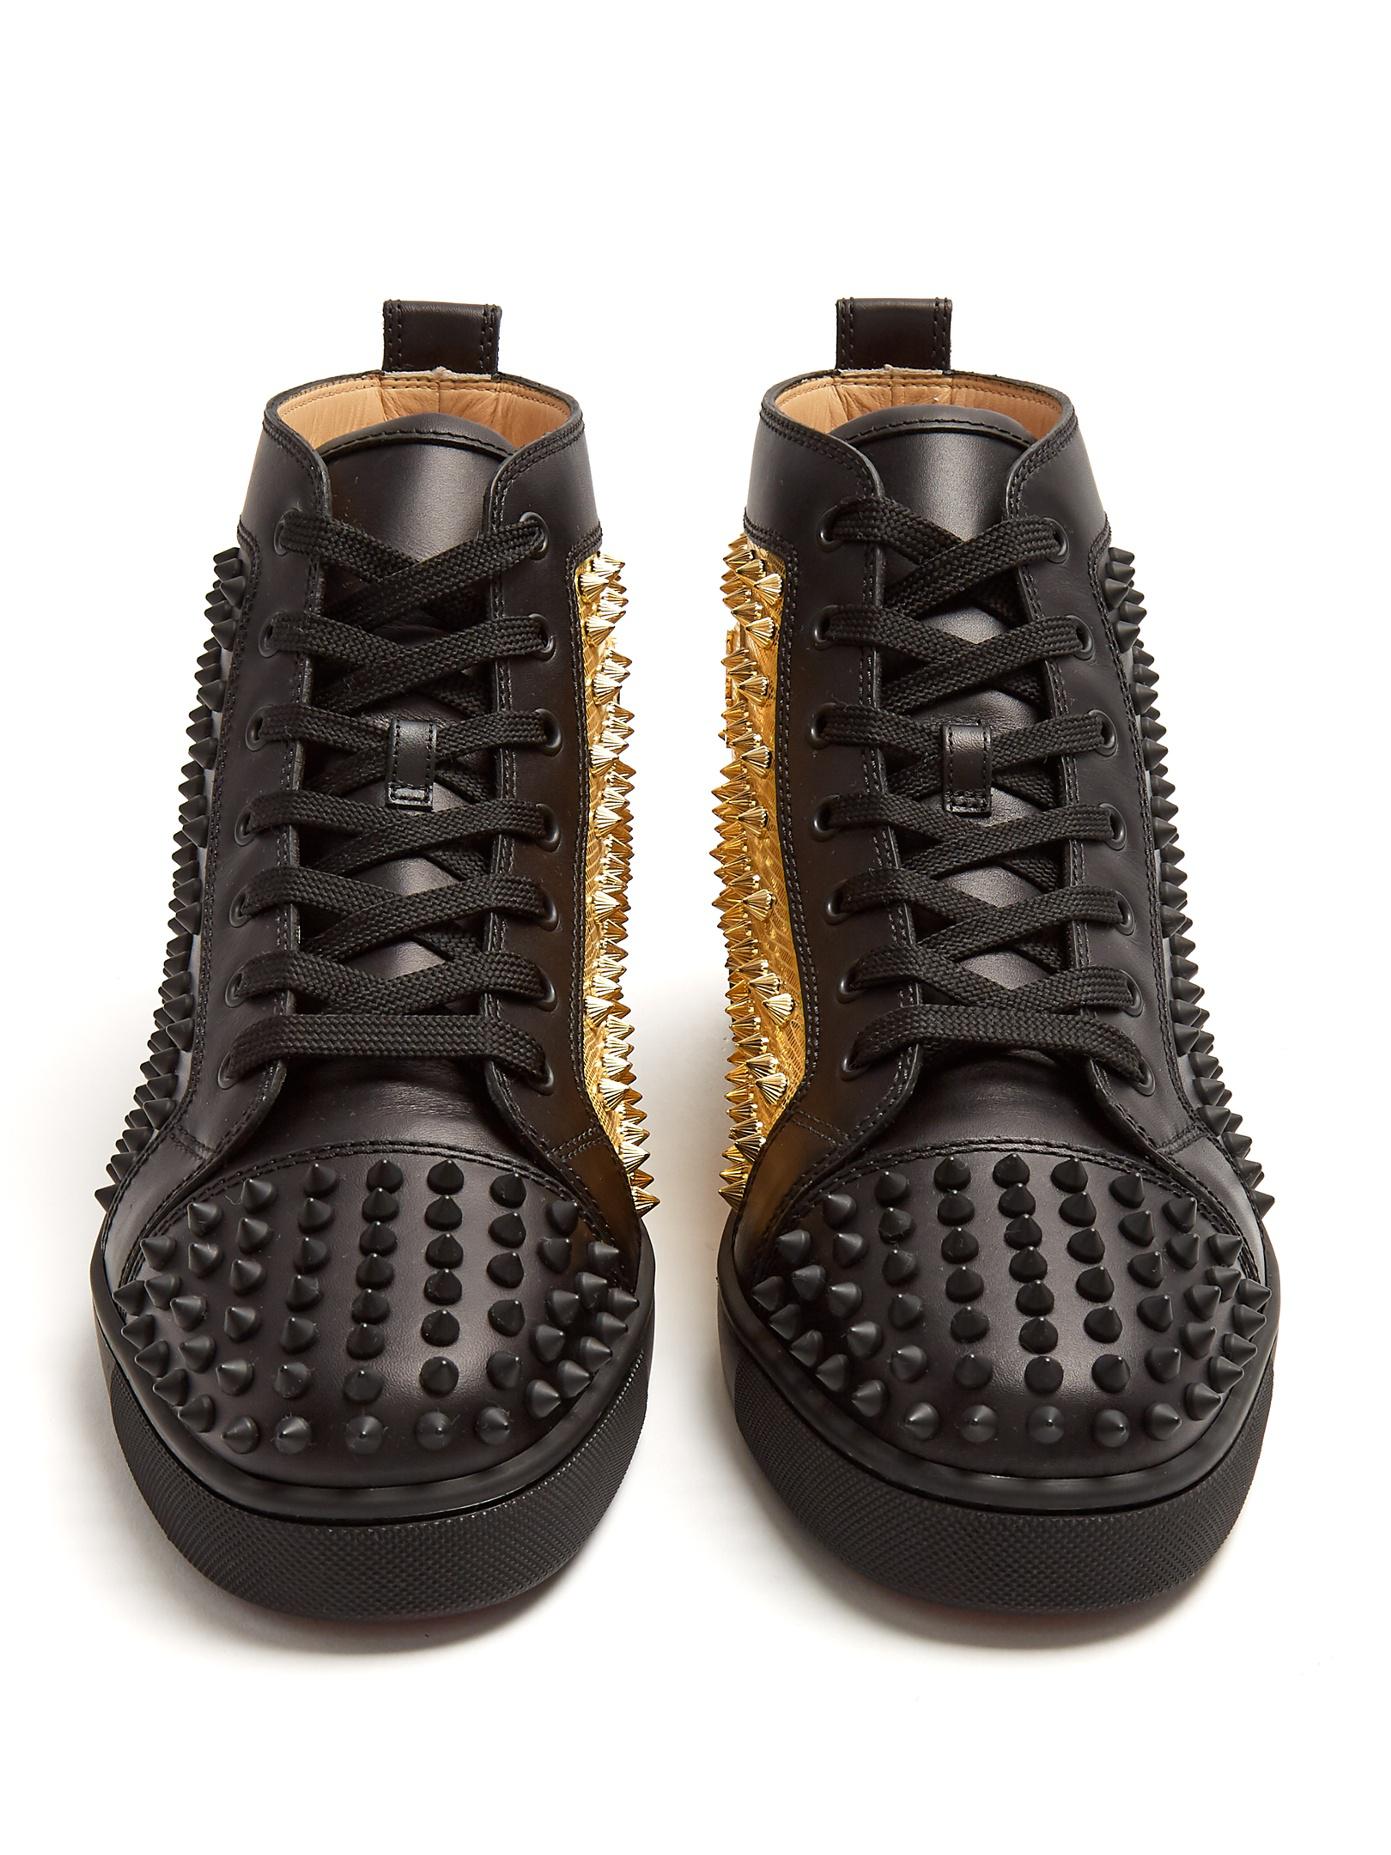 Christian Louboutin Leather Louis Spike-embellished High-top in Black for Men - Lyst